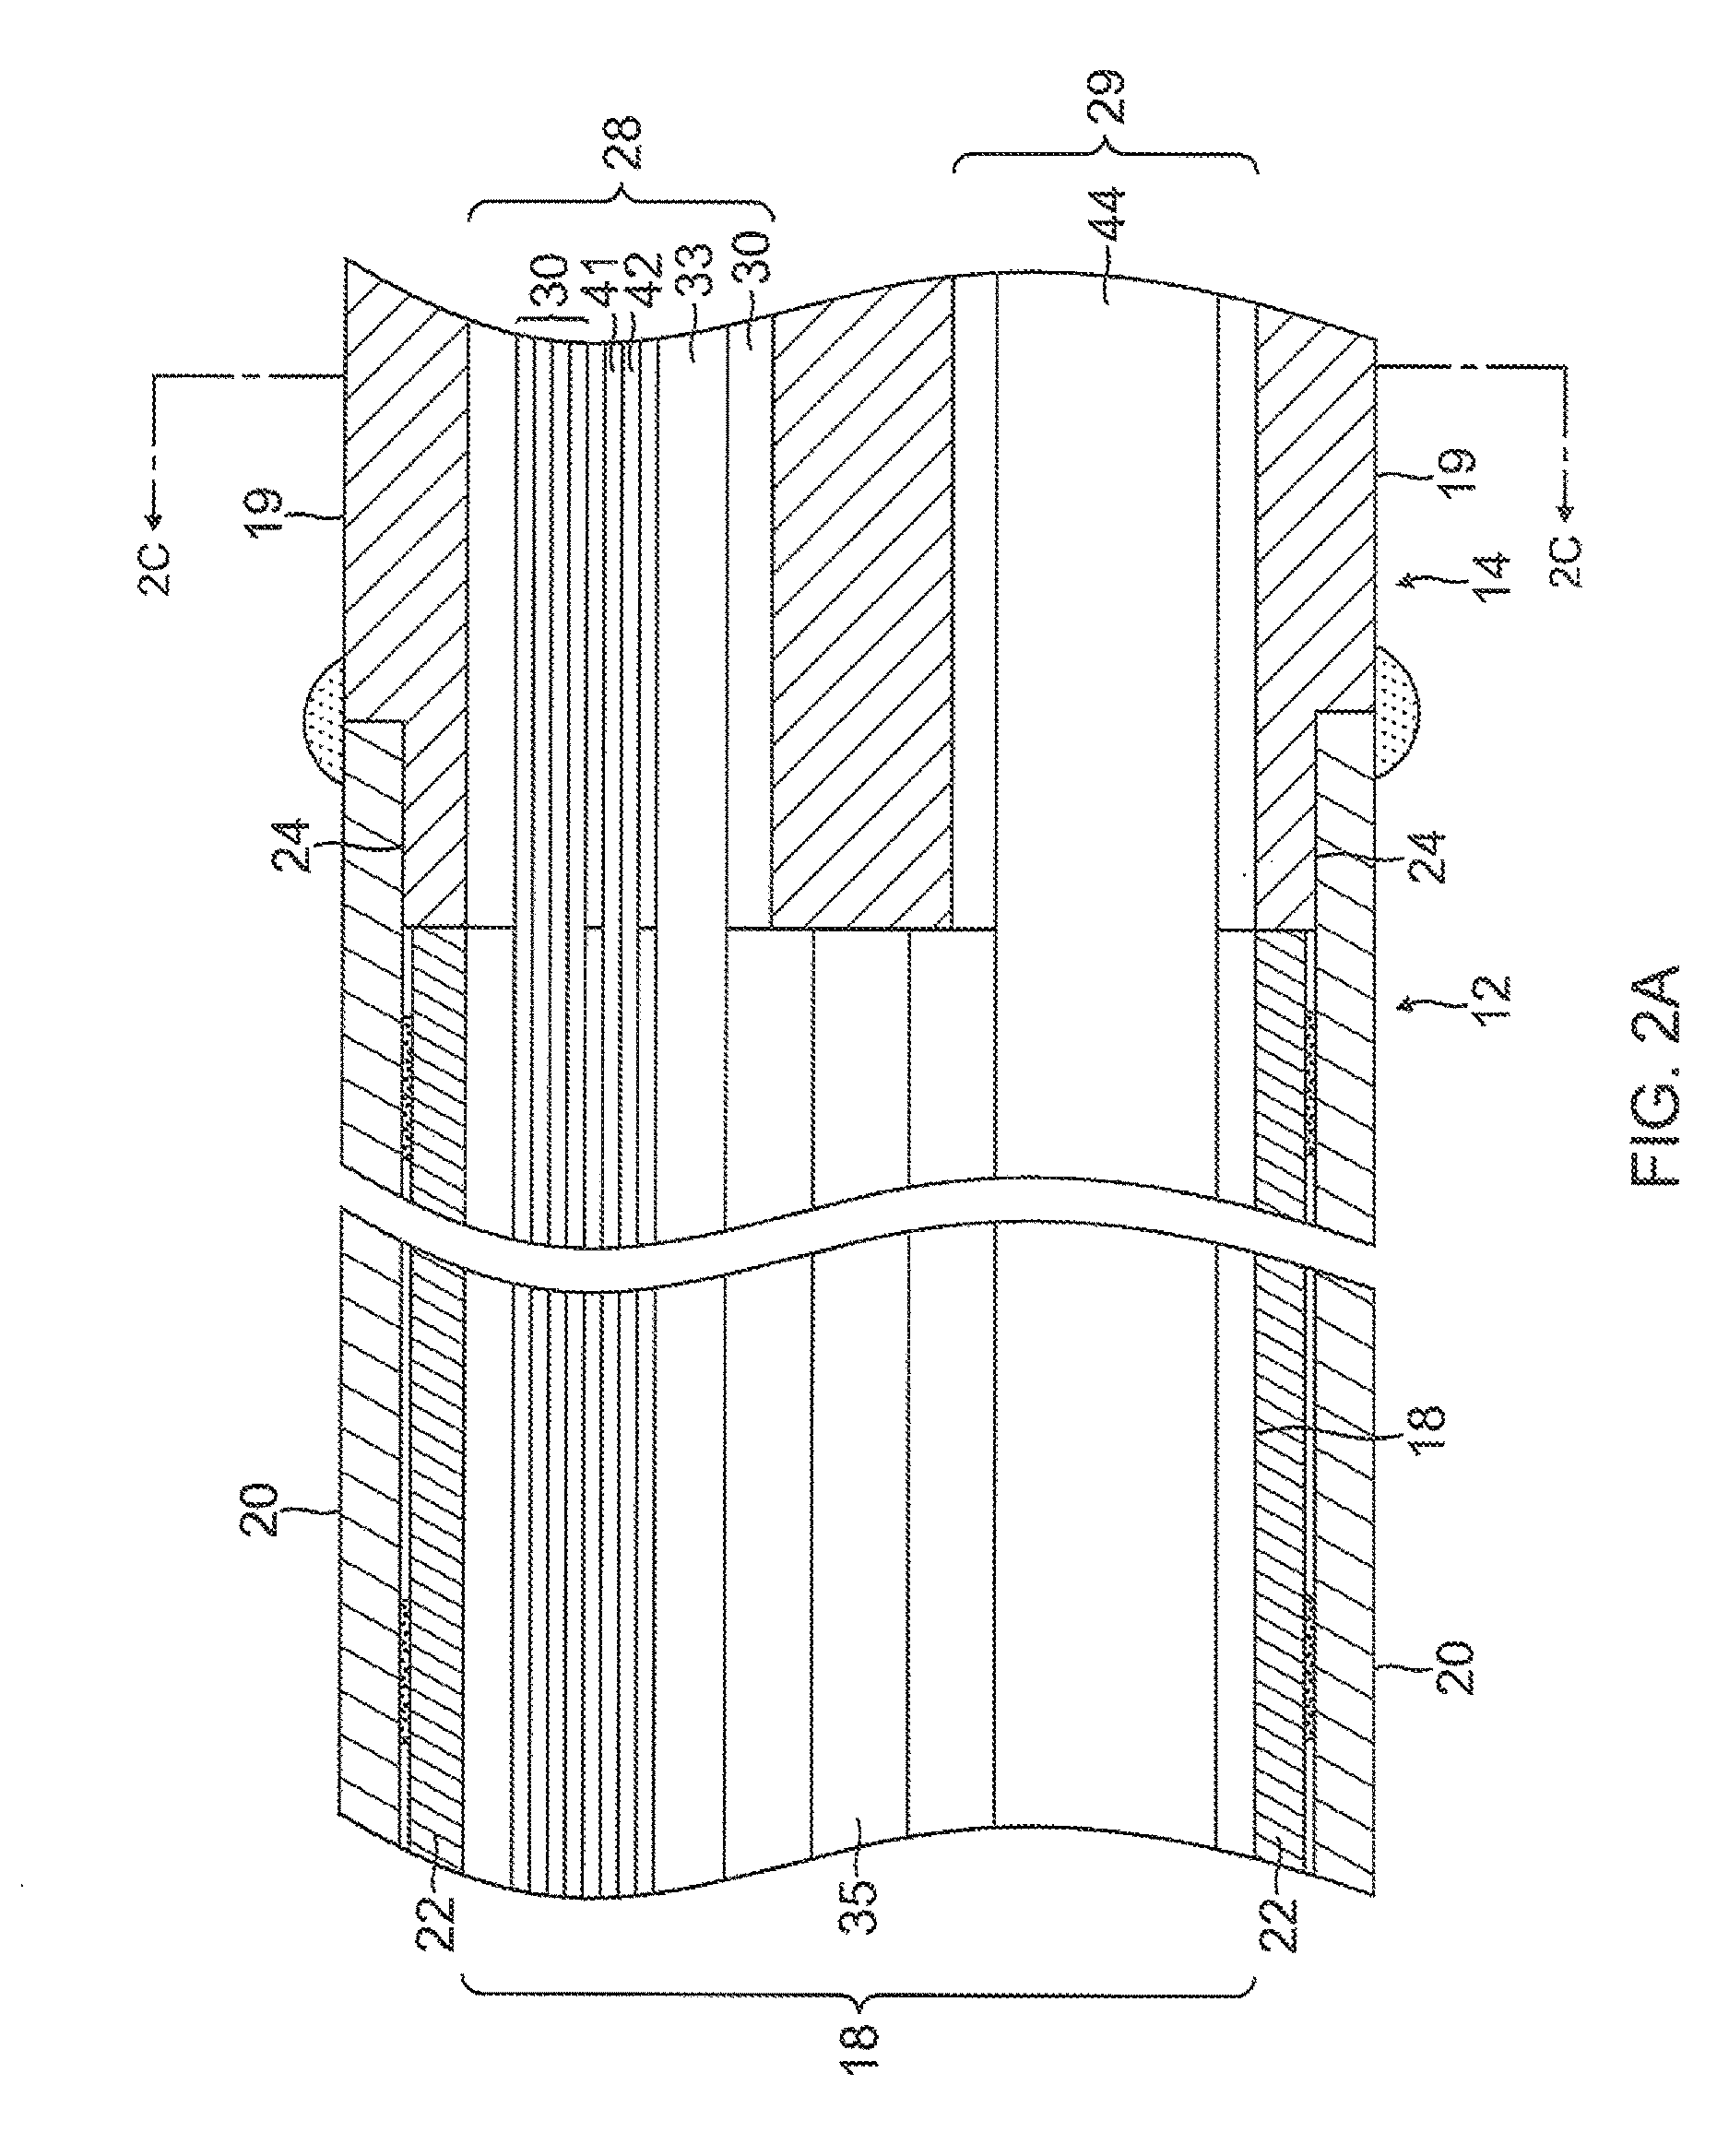 Irrigated ablation catheter having irrigation ports with reduced hydraulic resistance